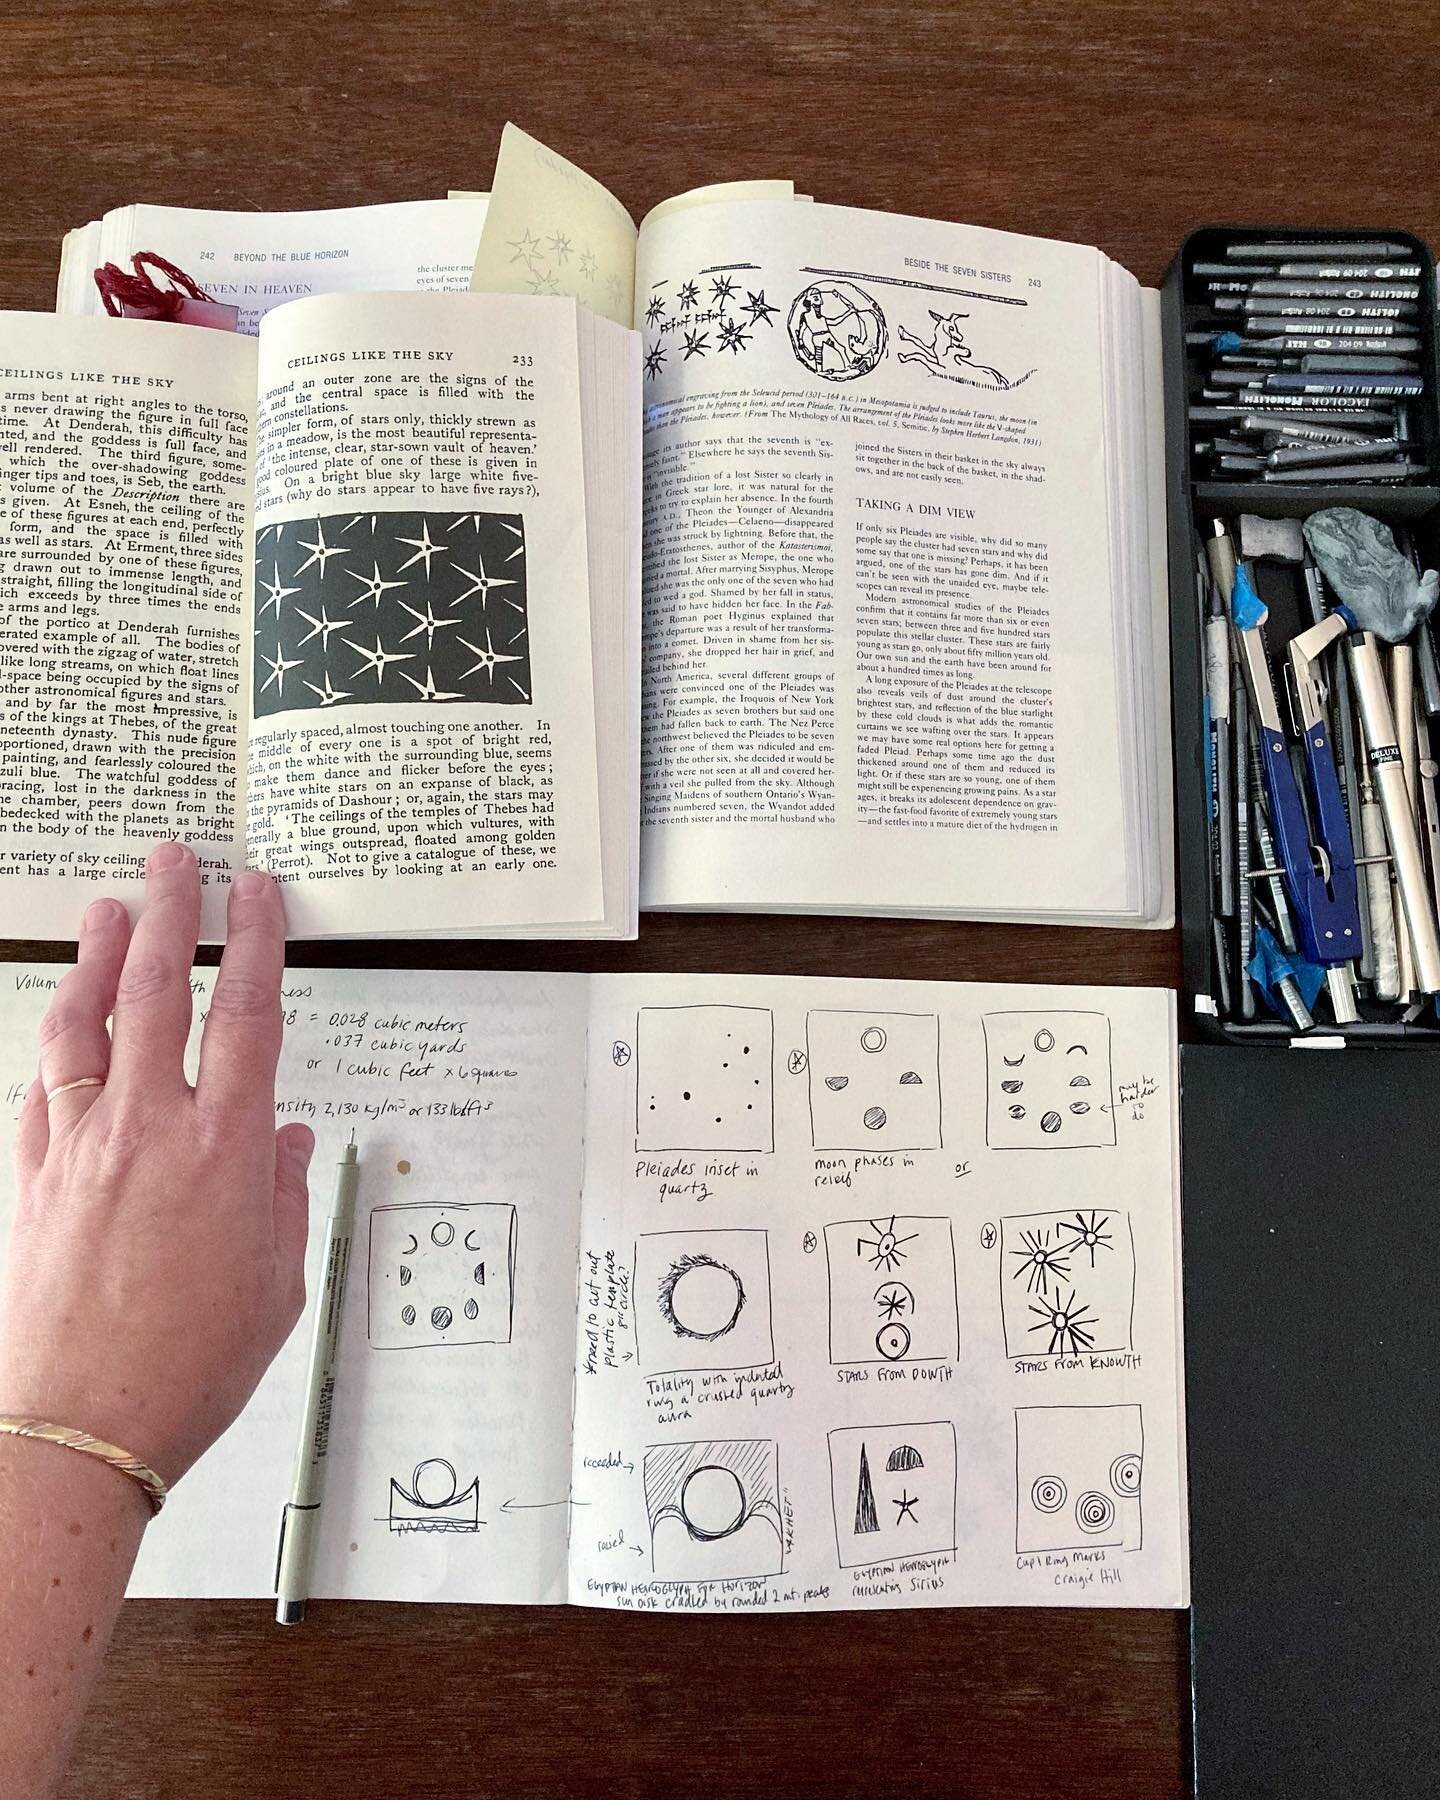 Ongoing notes, sketches, research&hellip;toward a stellar compendium. 
.
.
.
#christinaondrus #ancientastronomy #astronomy #stellarobservation #artandscience #drawing #archaeoastronomy #archeoastronomy #stars